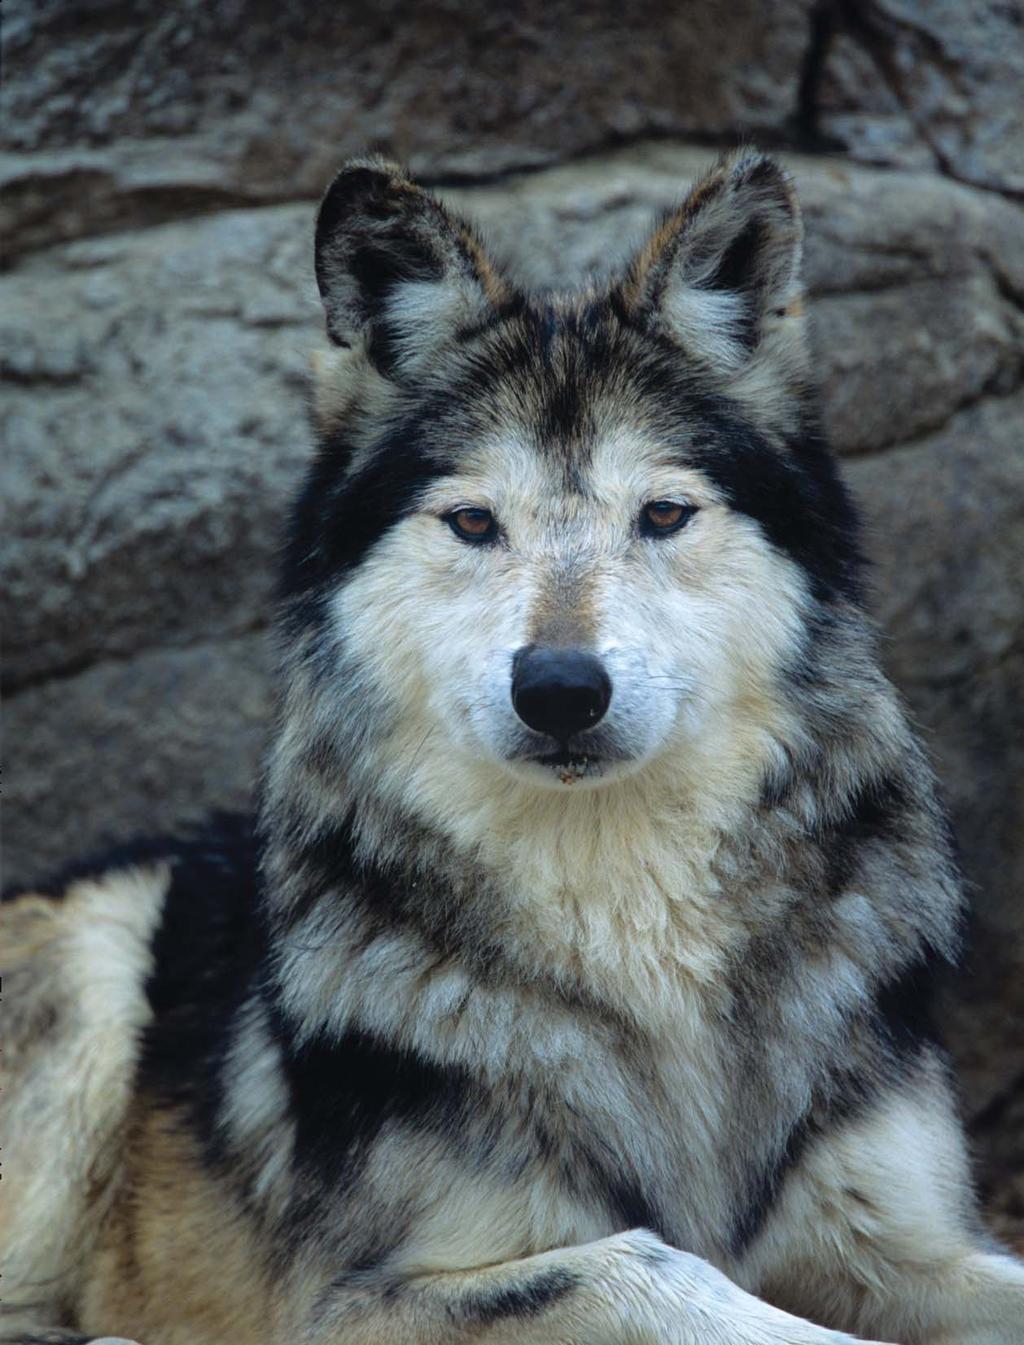 The Mexican gray wolf (Canis lupis baileyi) is the rarest and most distinct subspecies of gray wolf.